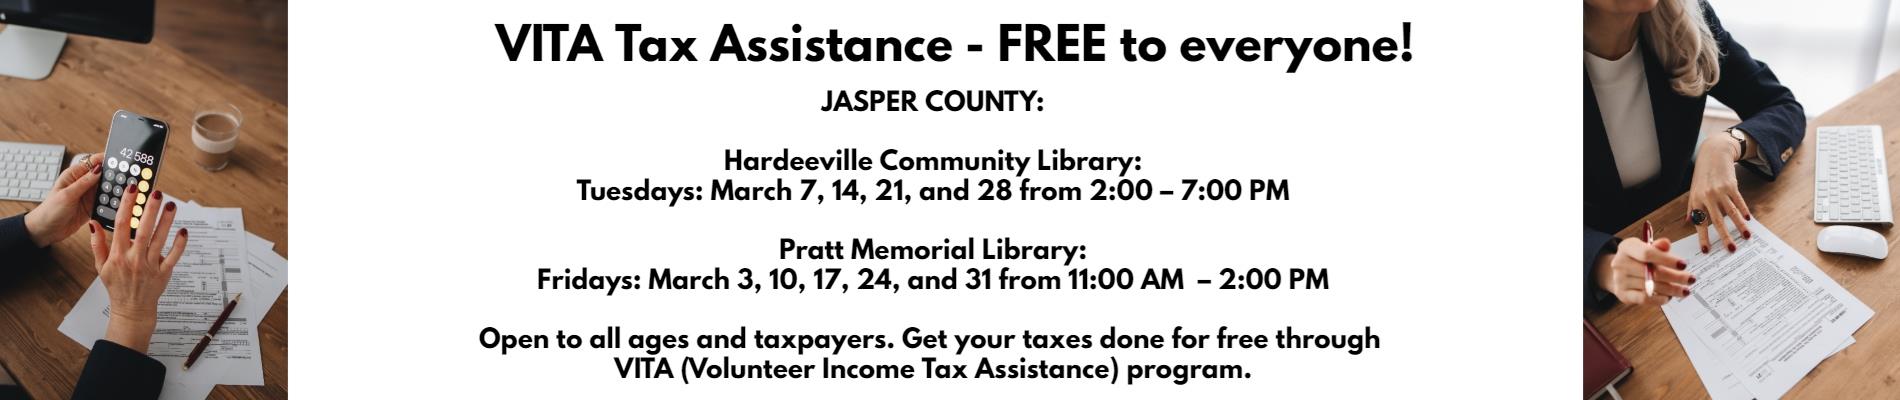 VITA Tax Assistance – FREE to everyone!!  JASPER COUNTY:  Hardeeville Community Library:  Tuesdays: March 7, 14, 21, and 28 from 2:00 – 7:00 PM     Pratt Memorial Library:  Fridays: March 3, 10, 17, 24, and 31 from 11:00 AM  – 2:00 PM     Open to all ages and taxpayers. Get your taxes done for free through VITA (Volunteer Income Tax Assistance) program.